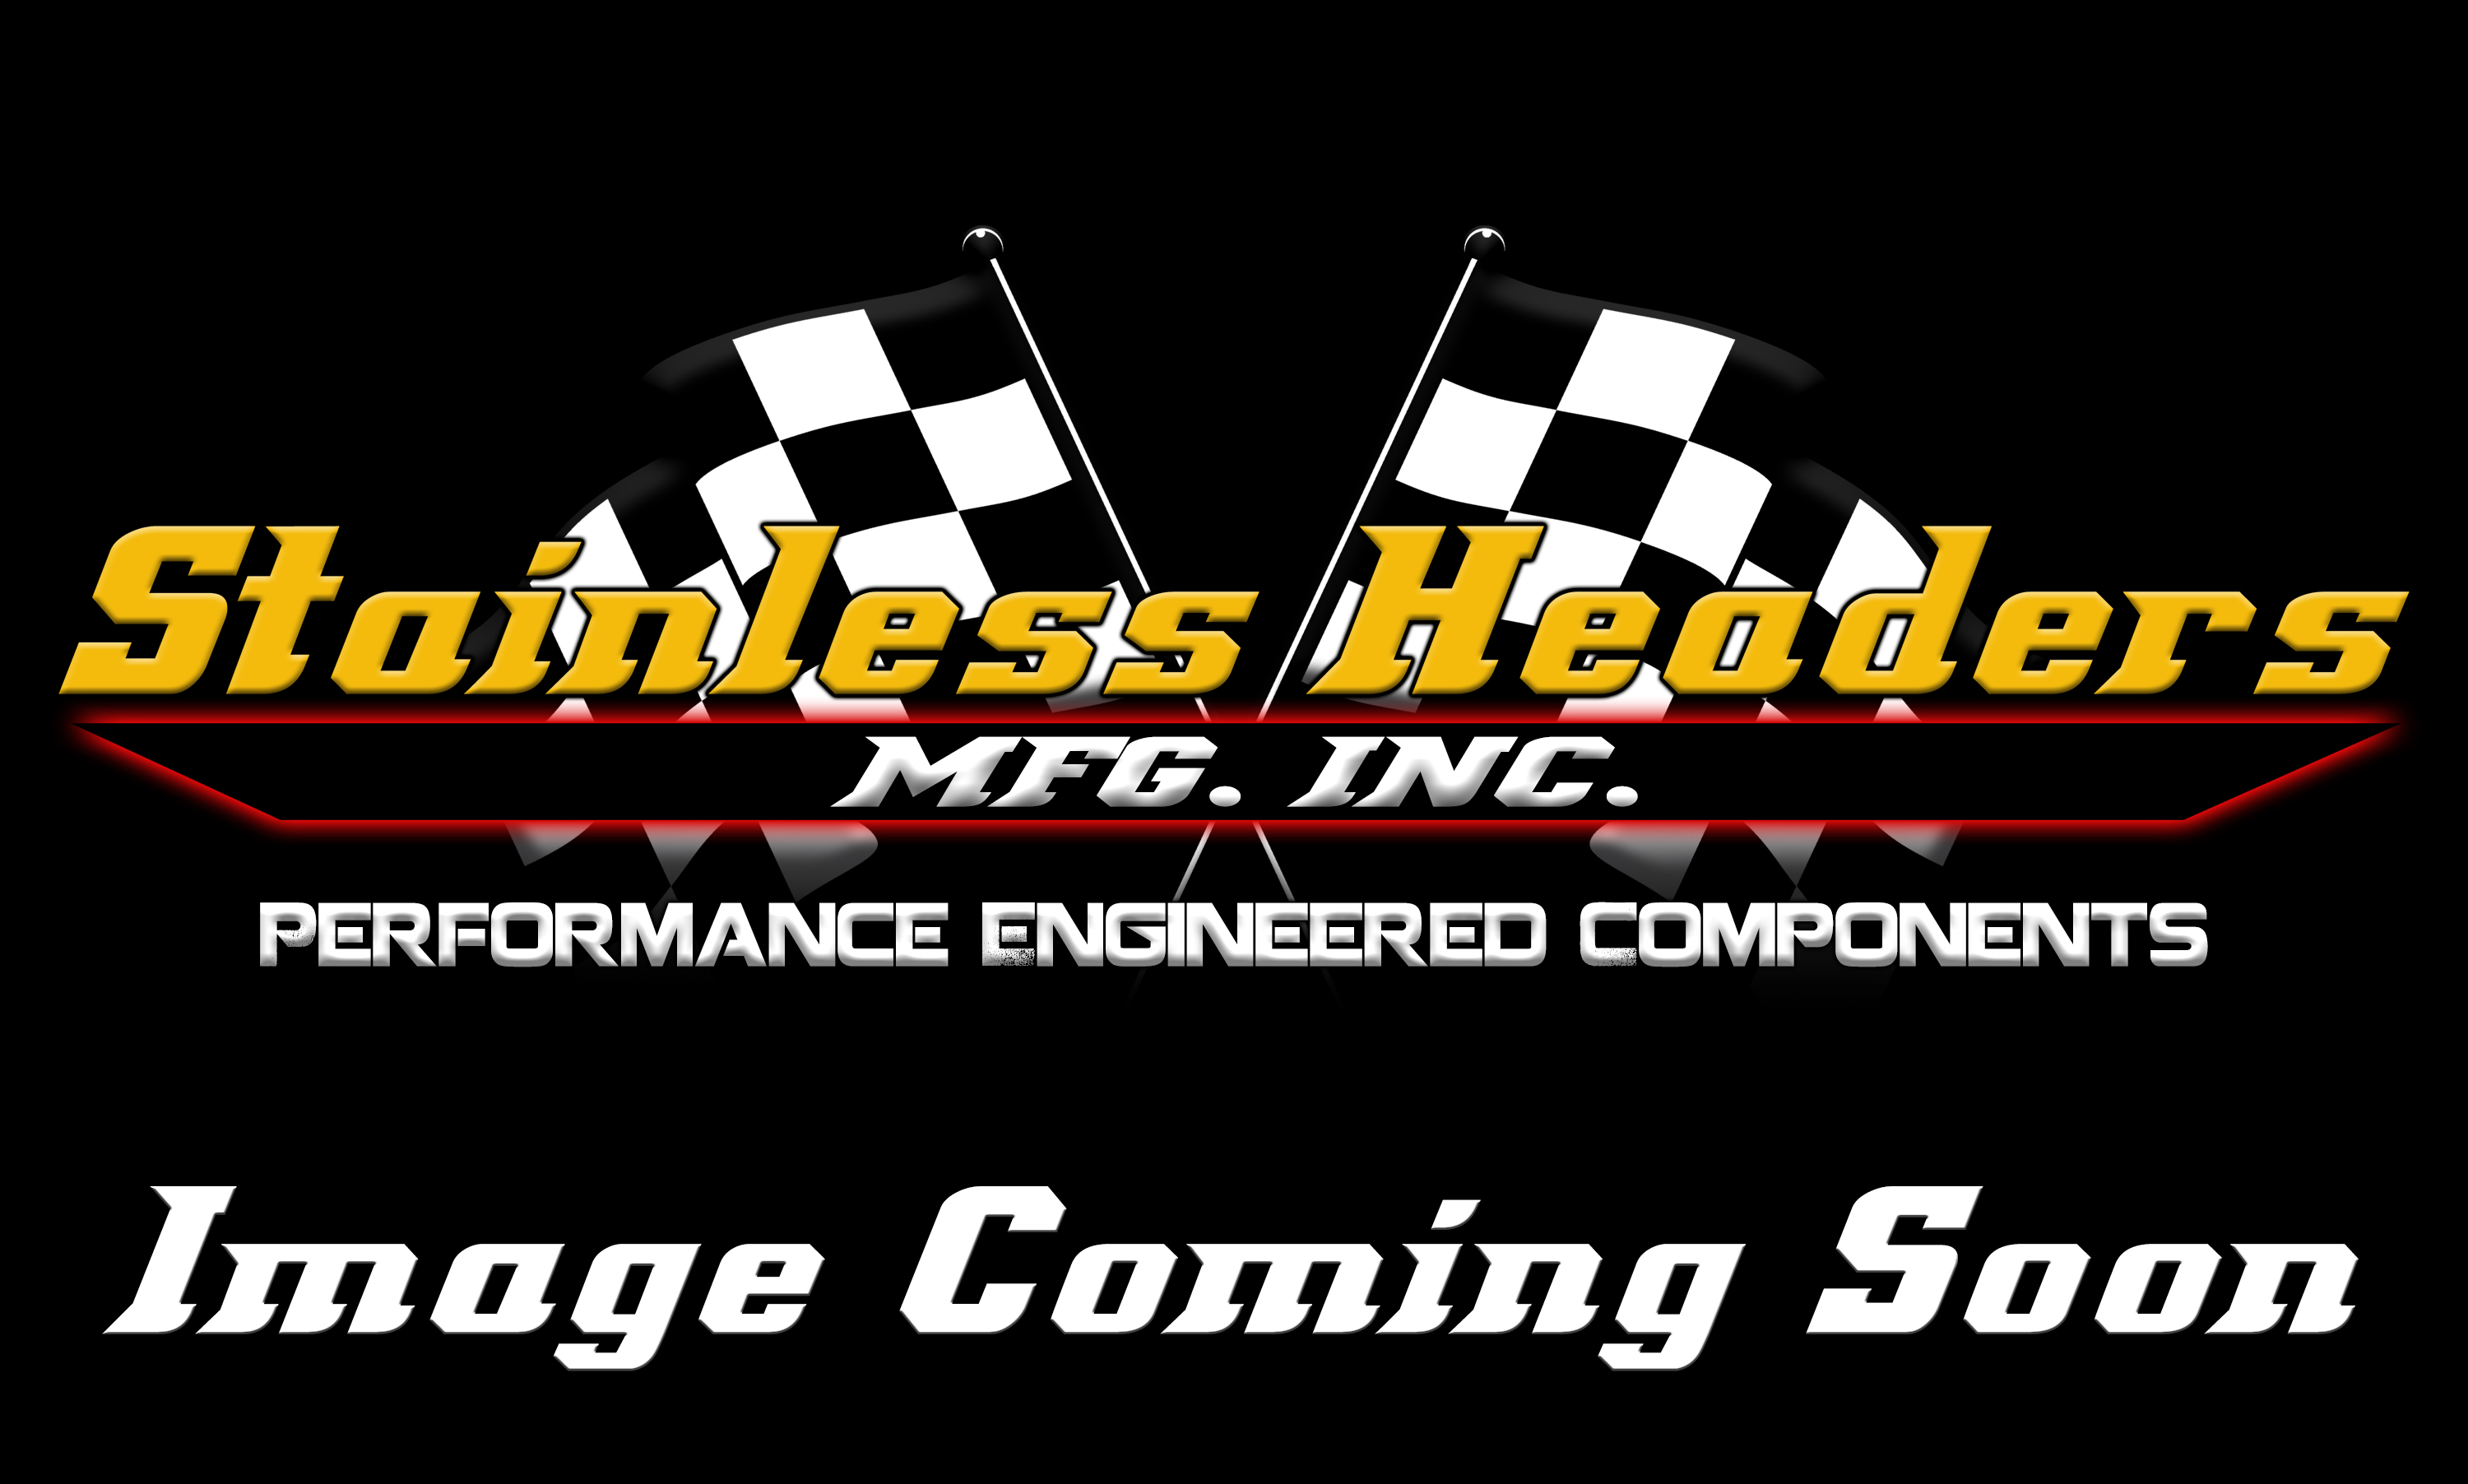 CompTurbo Technologies - CTR4202R-7485 Mid Frame Oil Lubricated 2.0 Turbocharger (1300 HP)